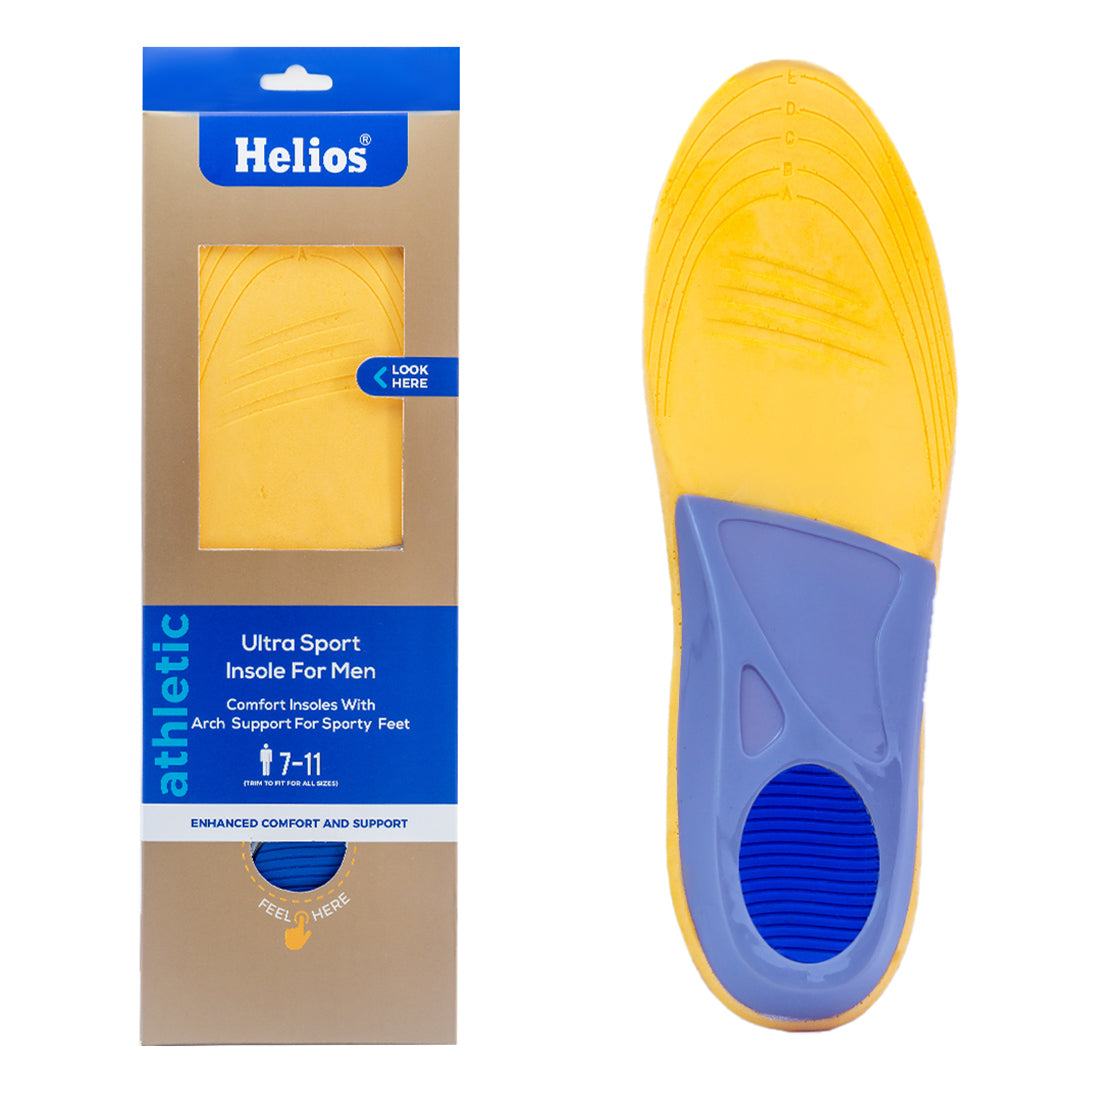 Helios Ultra sport insole with arch support  {7-11 size}